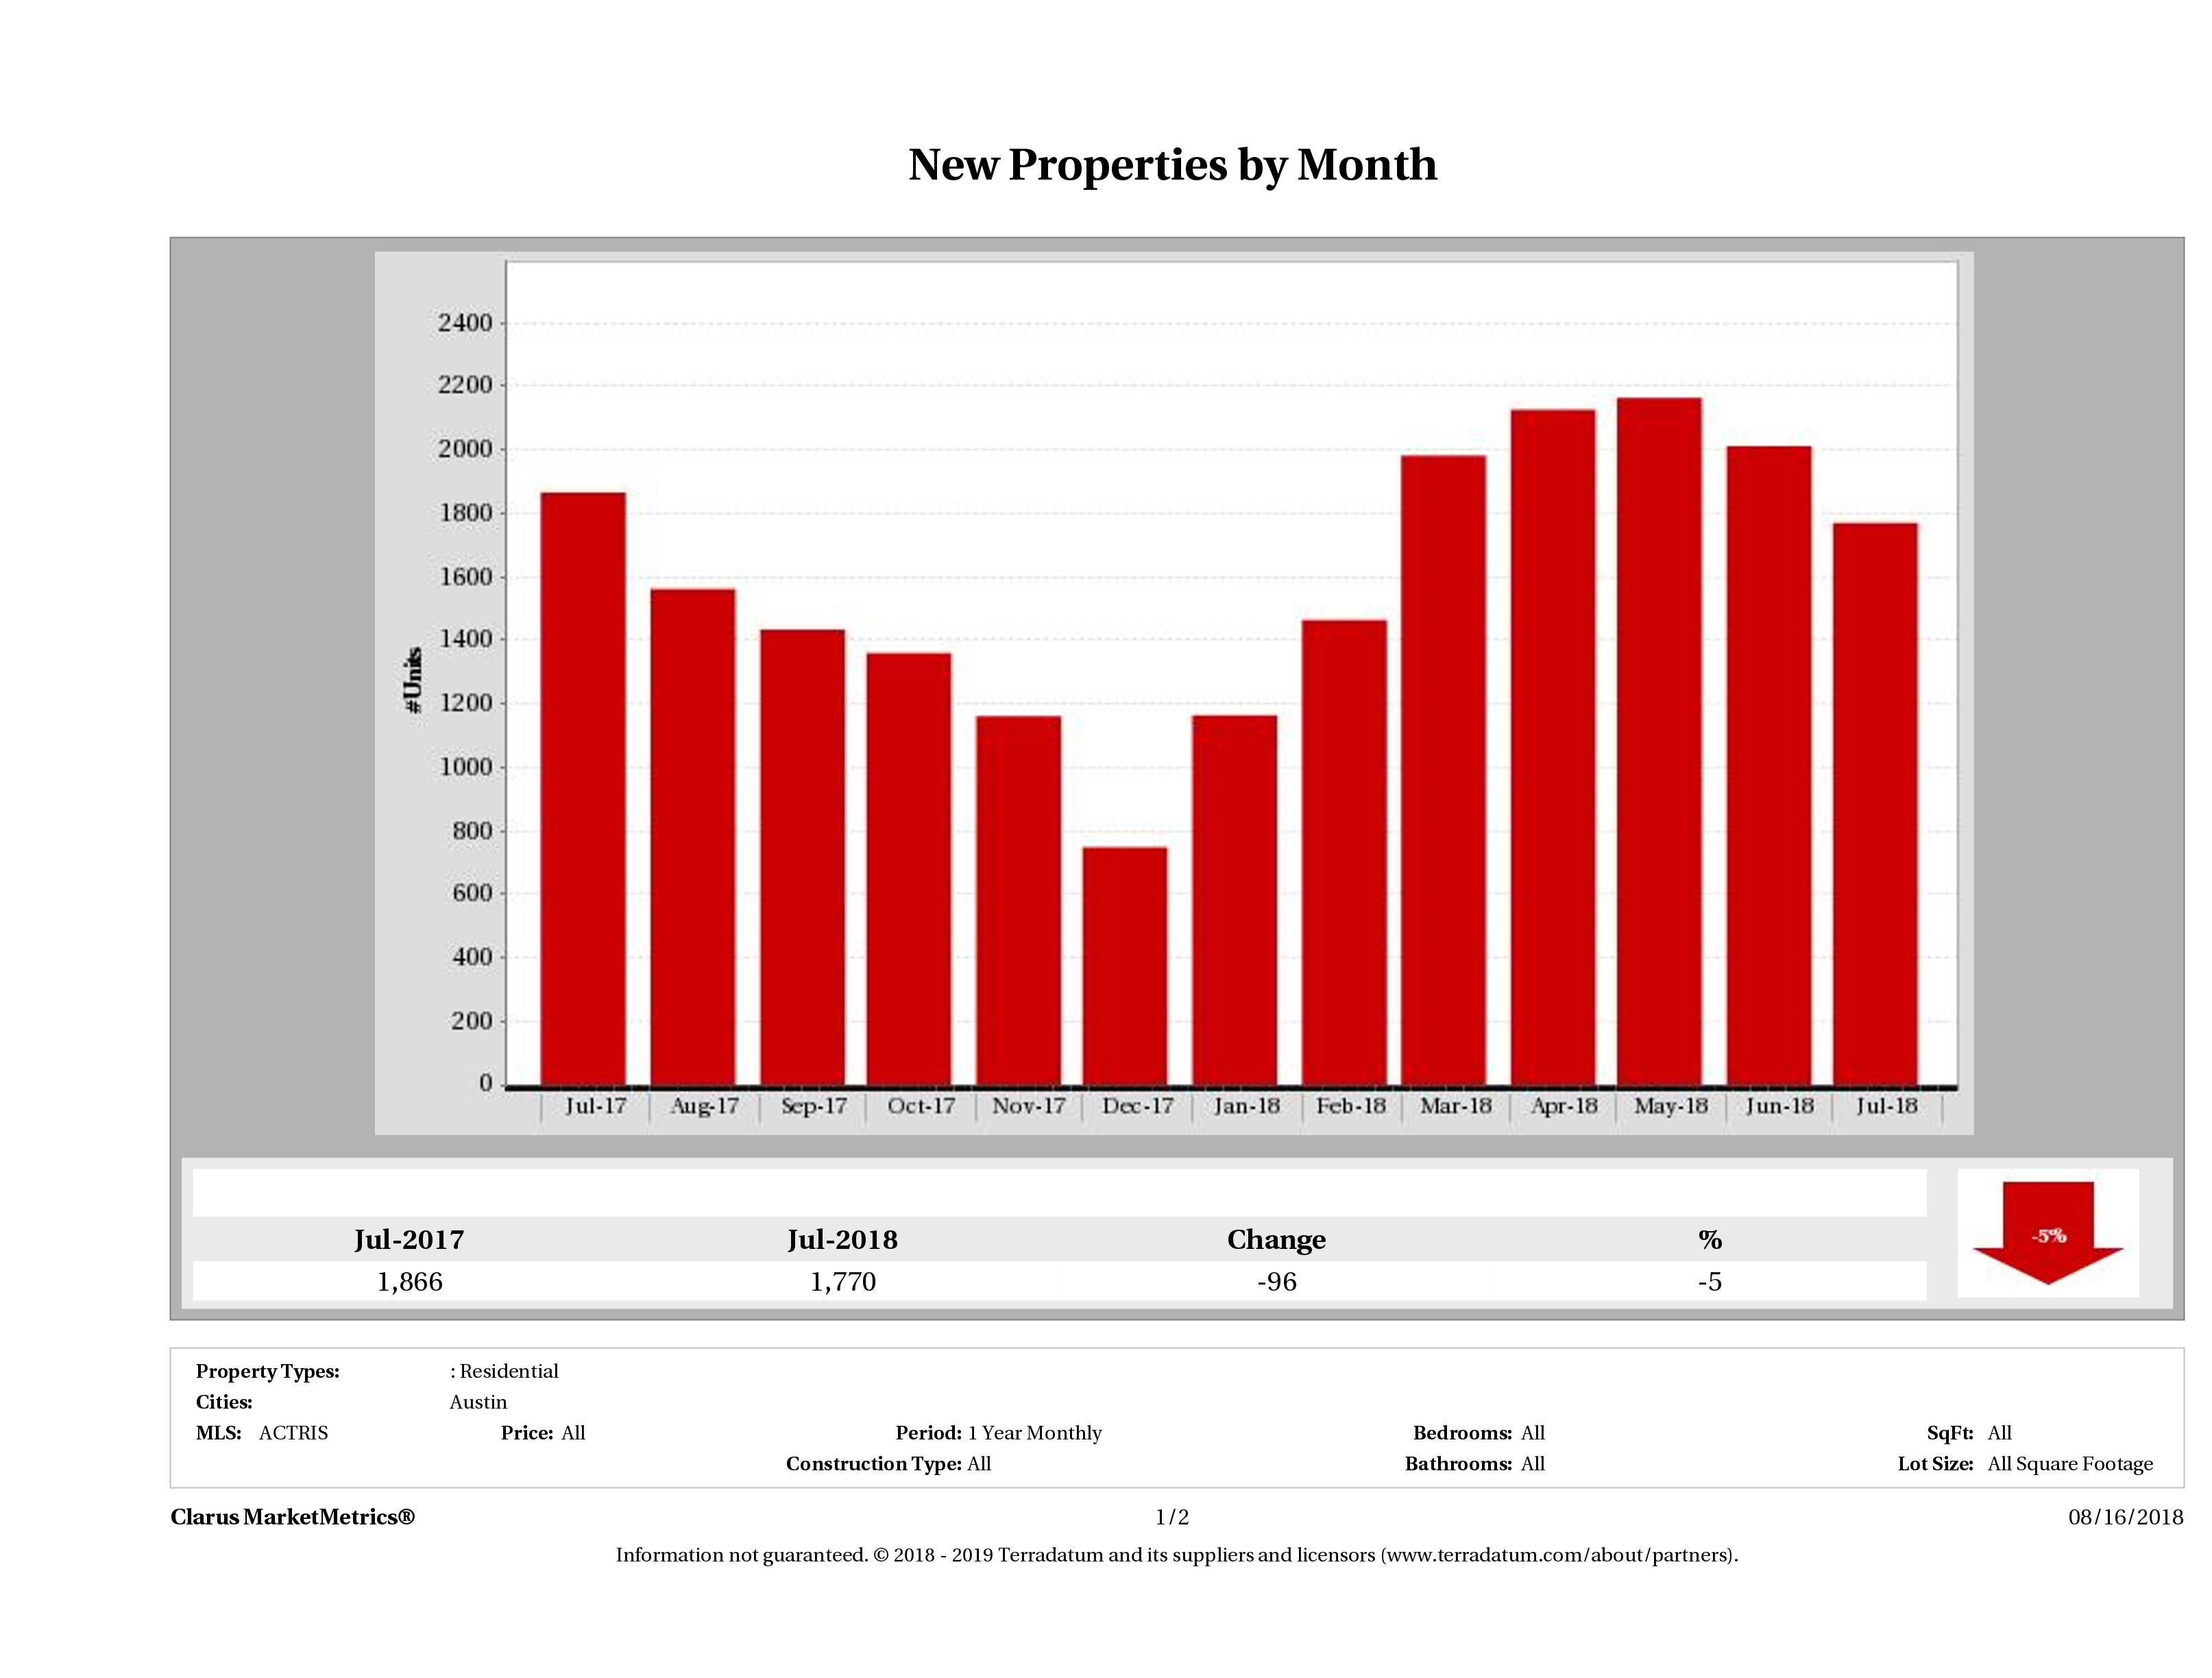 Austin number of new listings July 2018